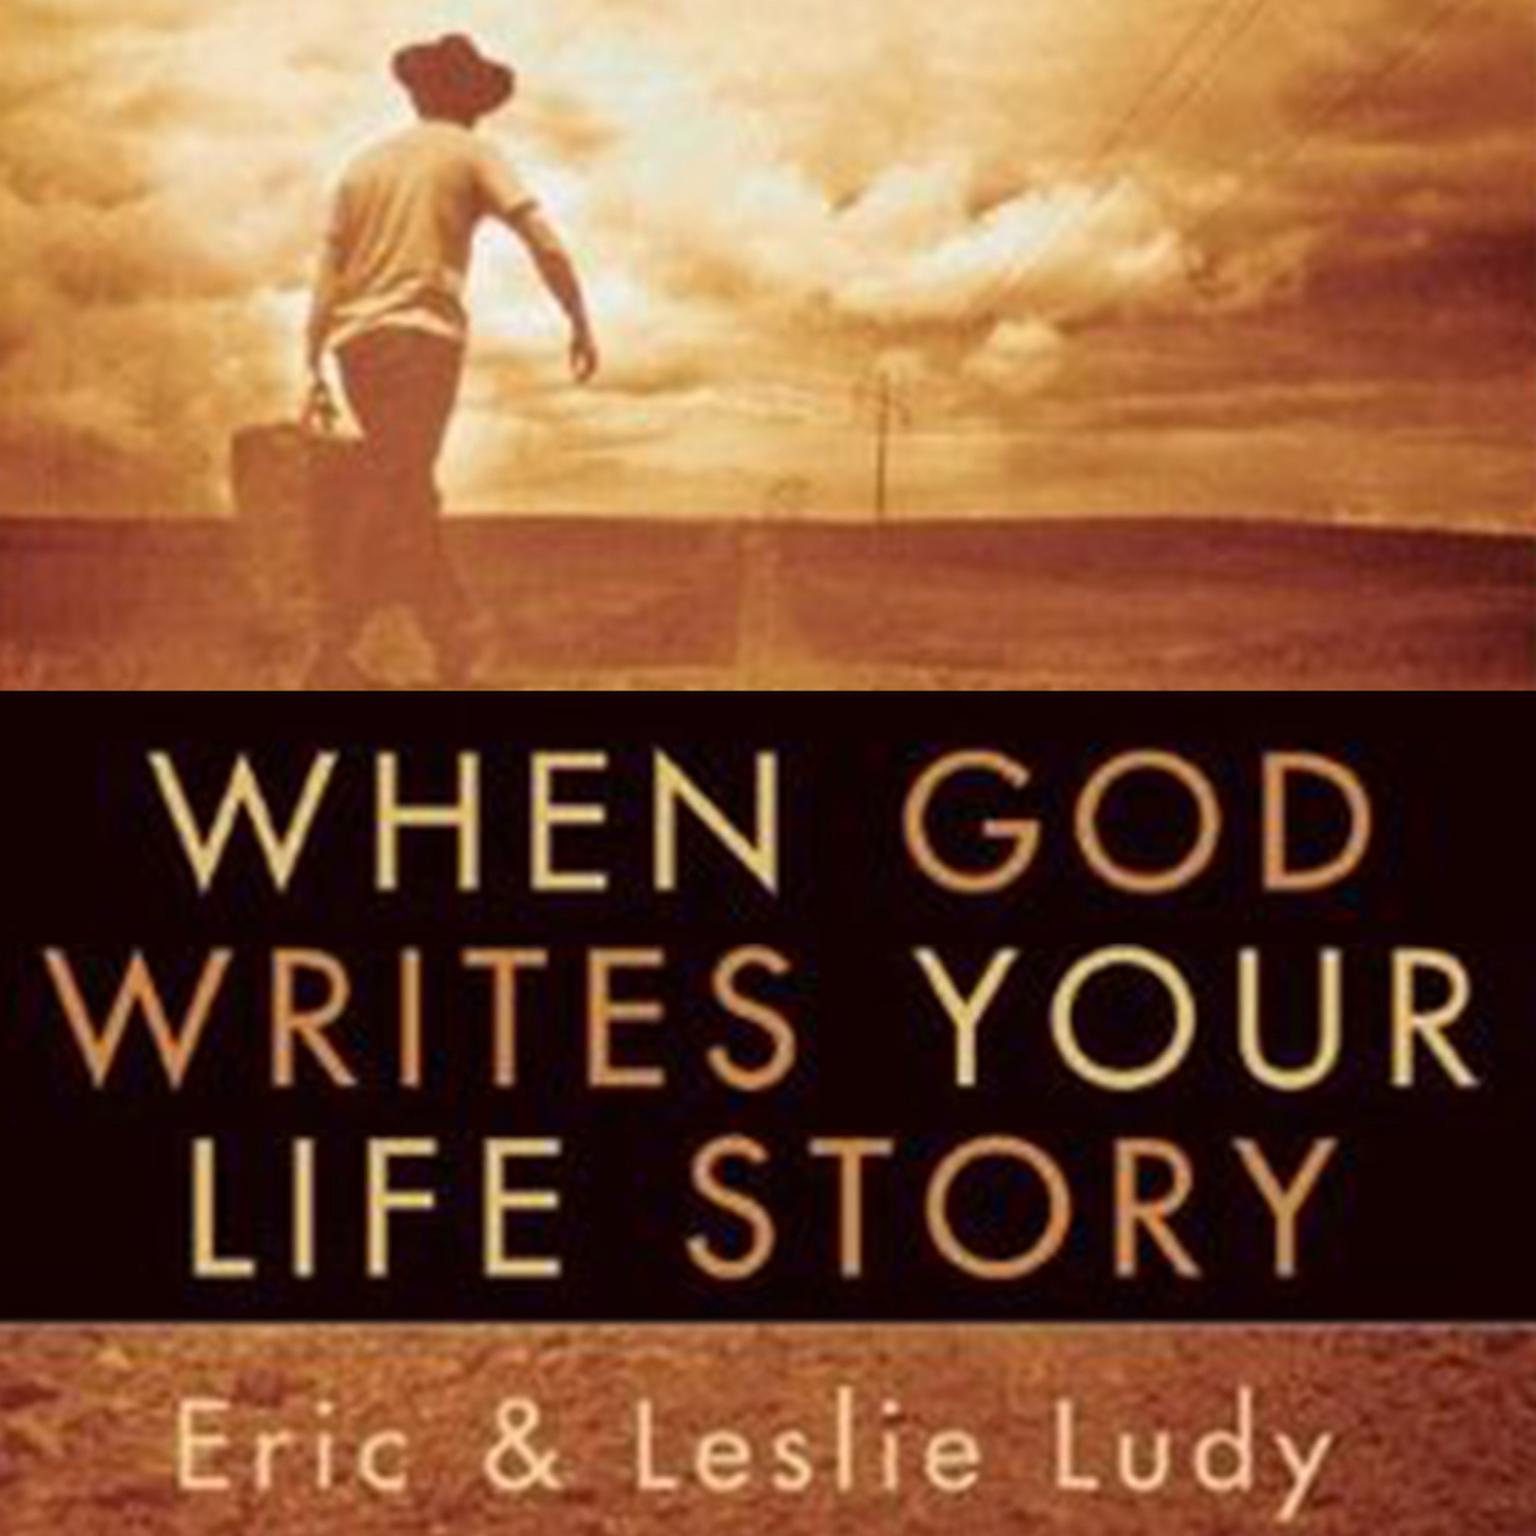 When God Writes Your Life Story: Experience the Ultimate Adventure Audiobook, by Eric Ludy